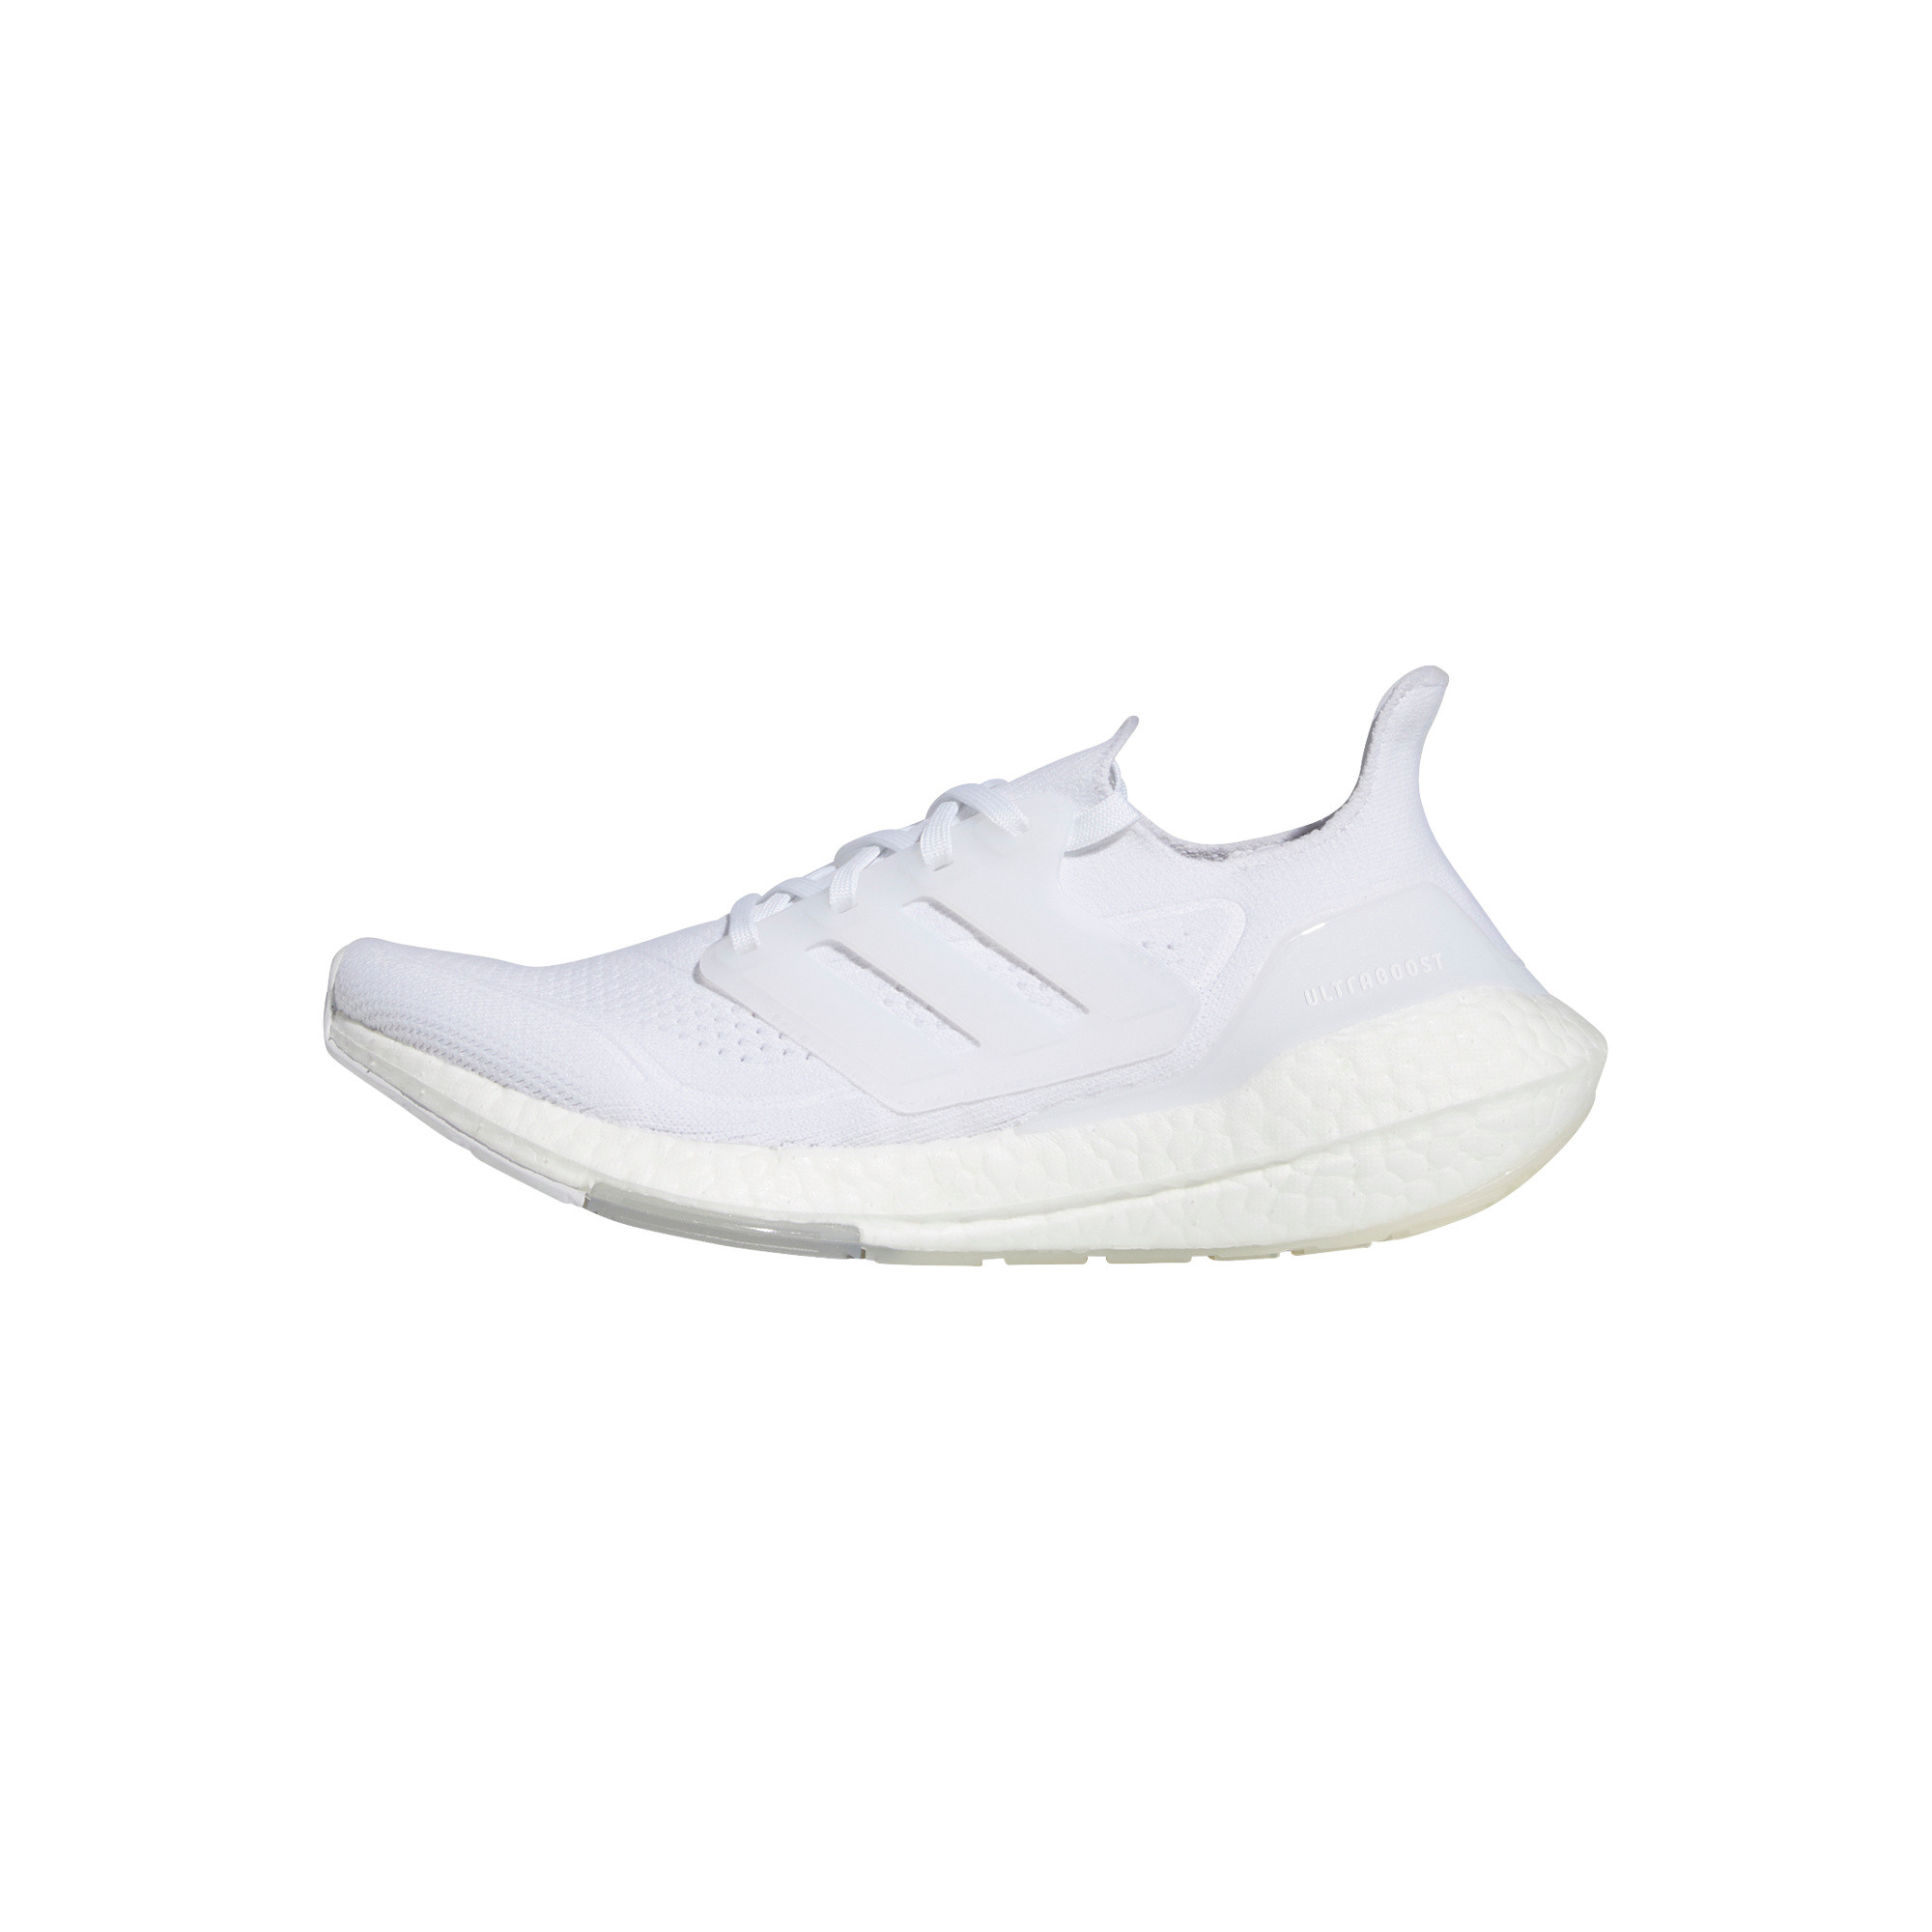 Ultraboost 21 Shoes, White, large image number 4